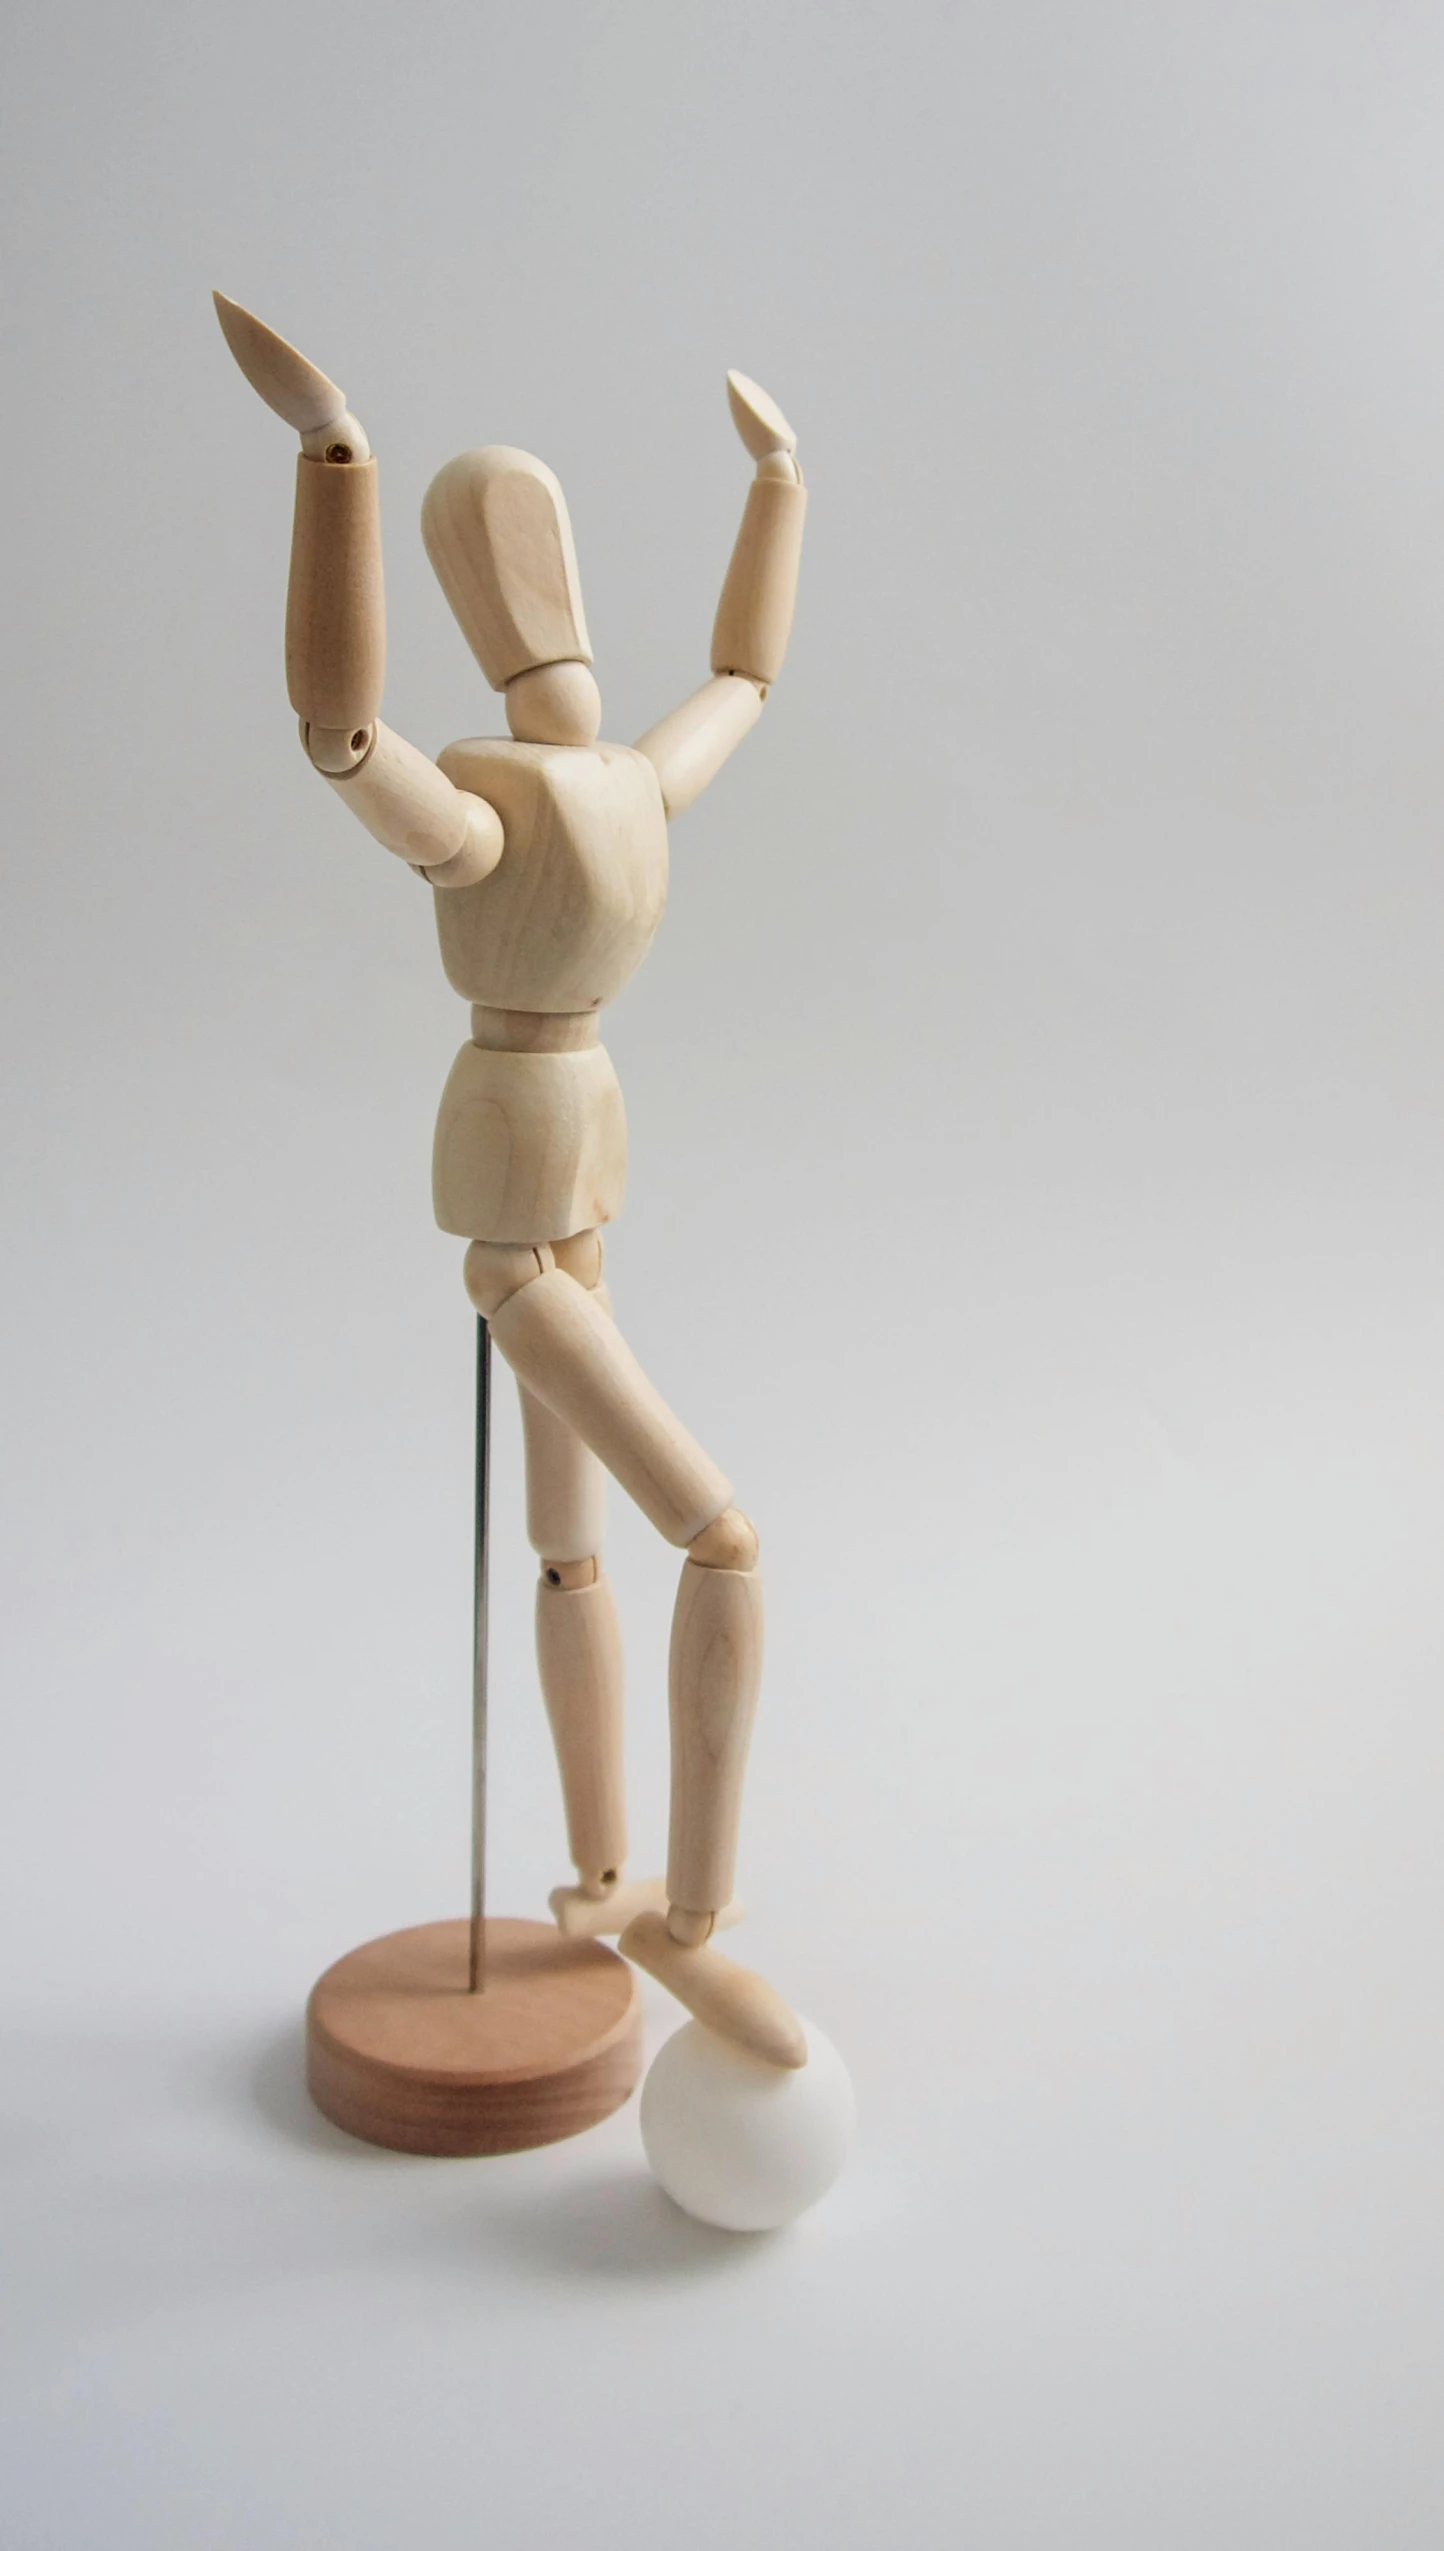 a wooden mannequin standing on a wooden base, by David Simpson, unsplash, articulated joints, with arms up, pose 4 of 1 6, acrobat